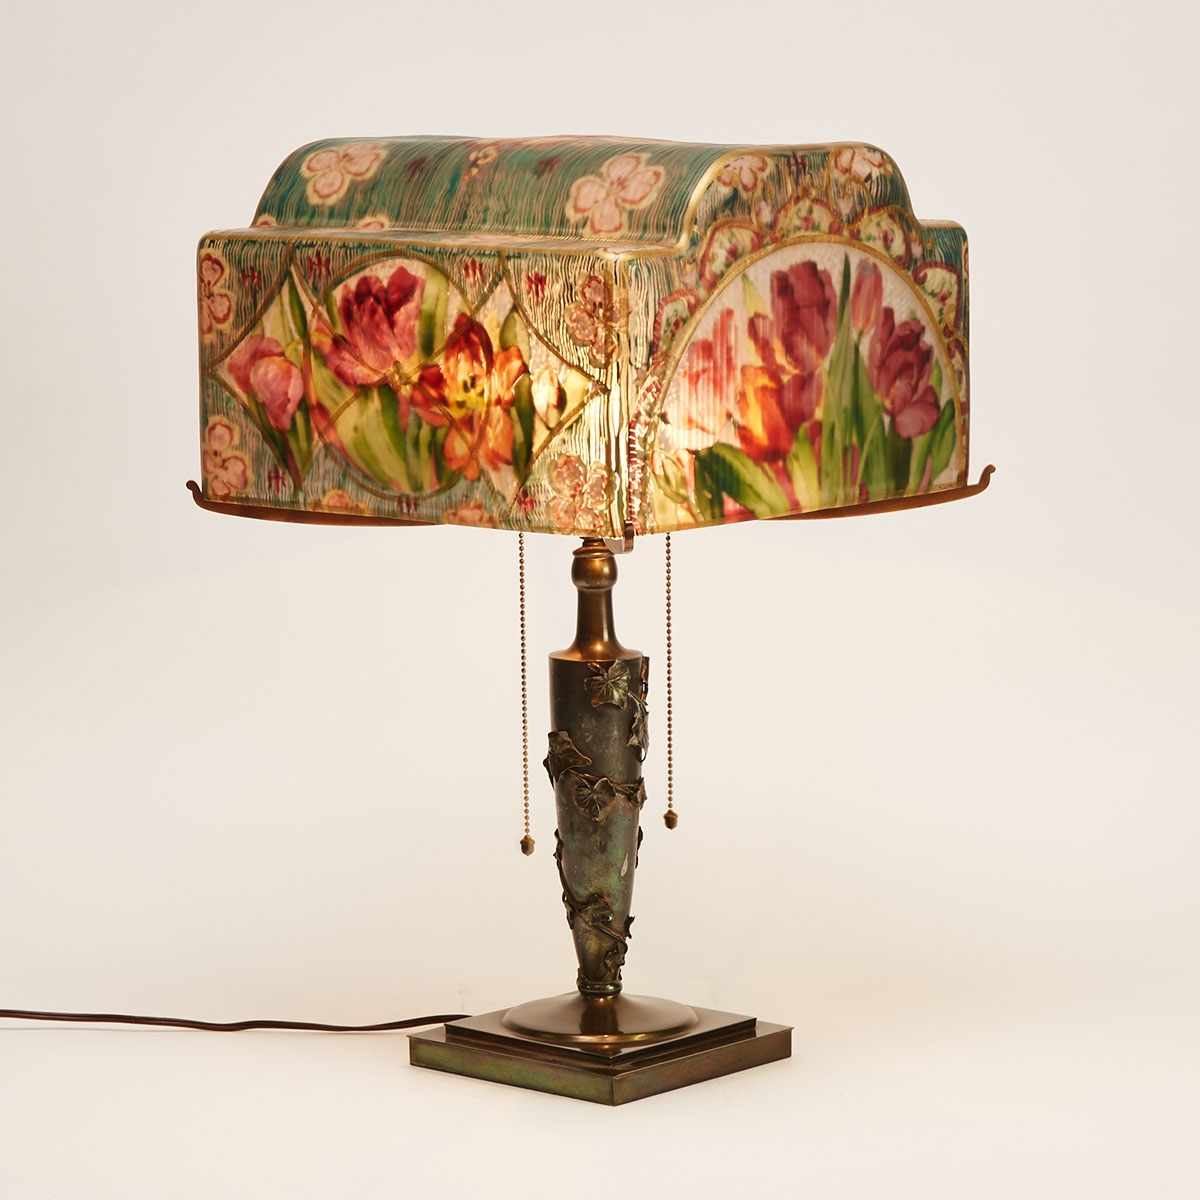 Pairpoint Puffy Tulip Pattern 'Roma' Shade Table Lamp, early 20th century